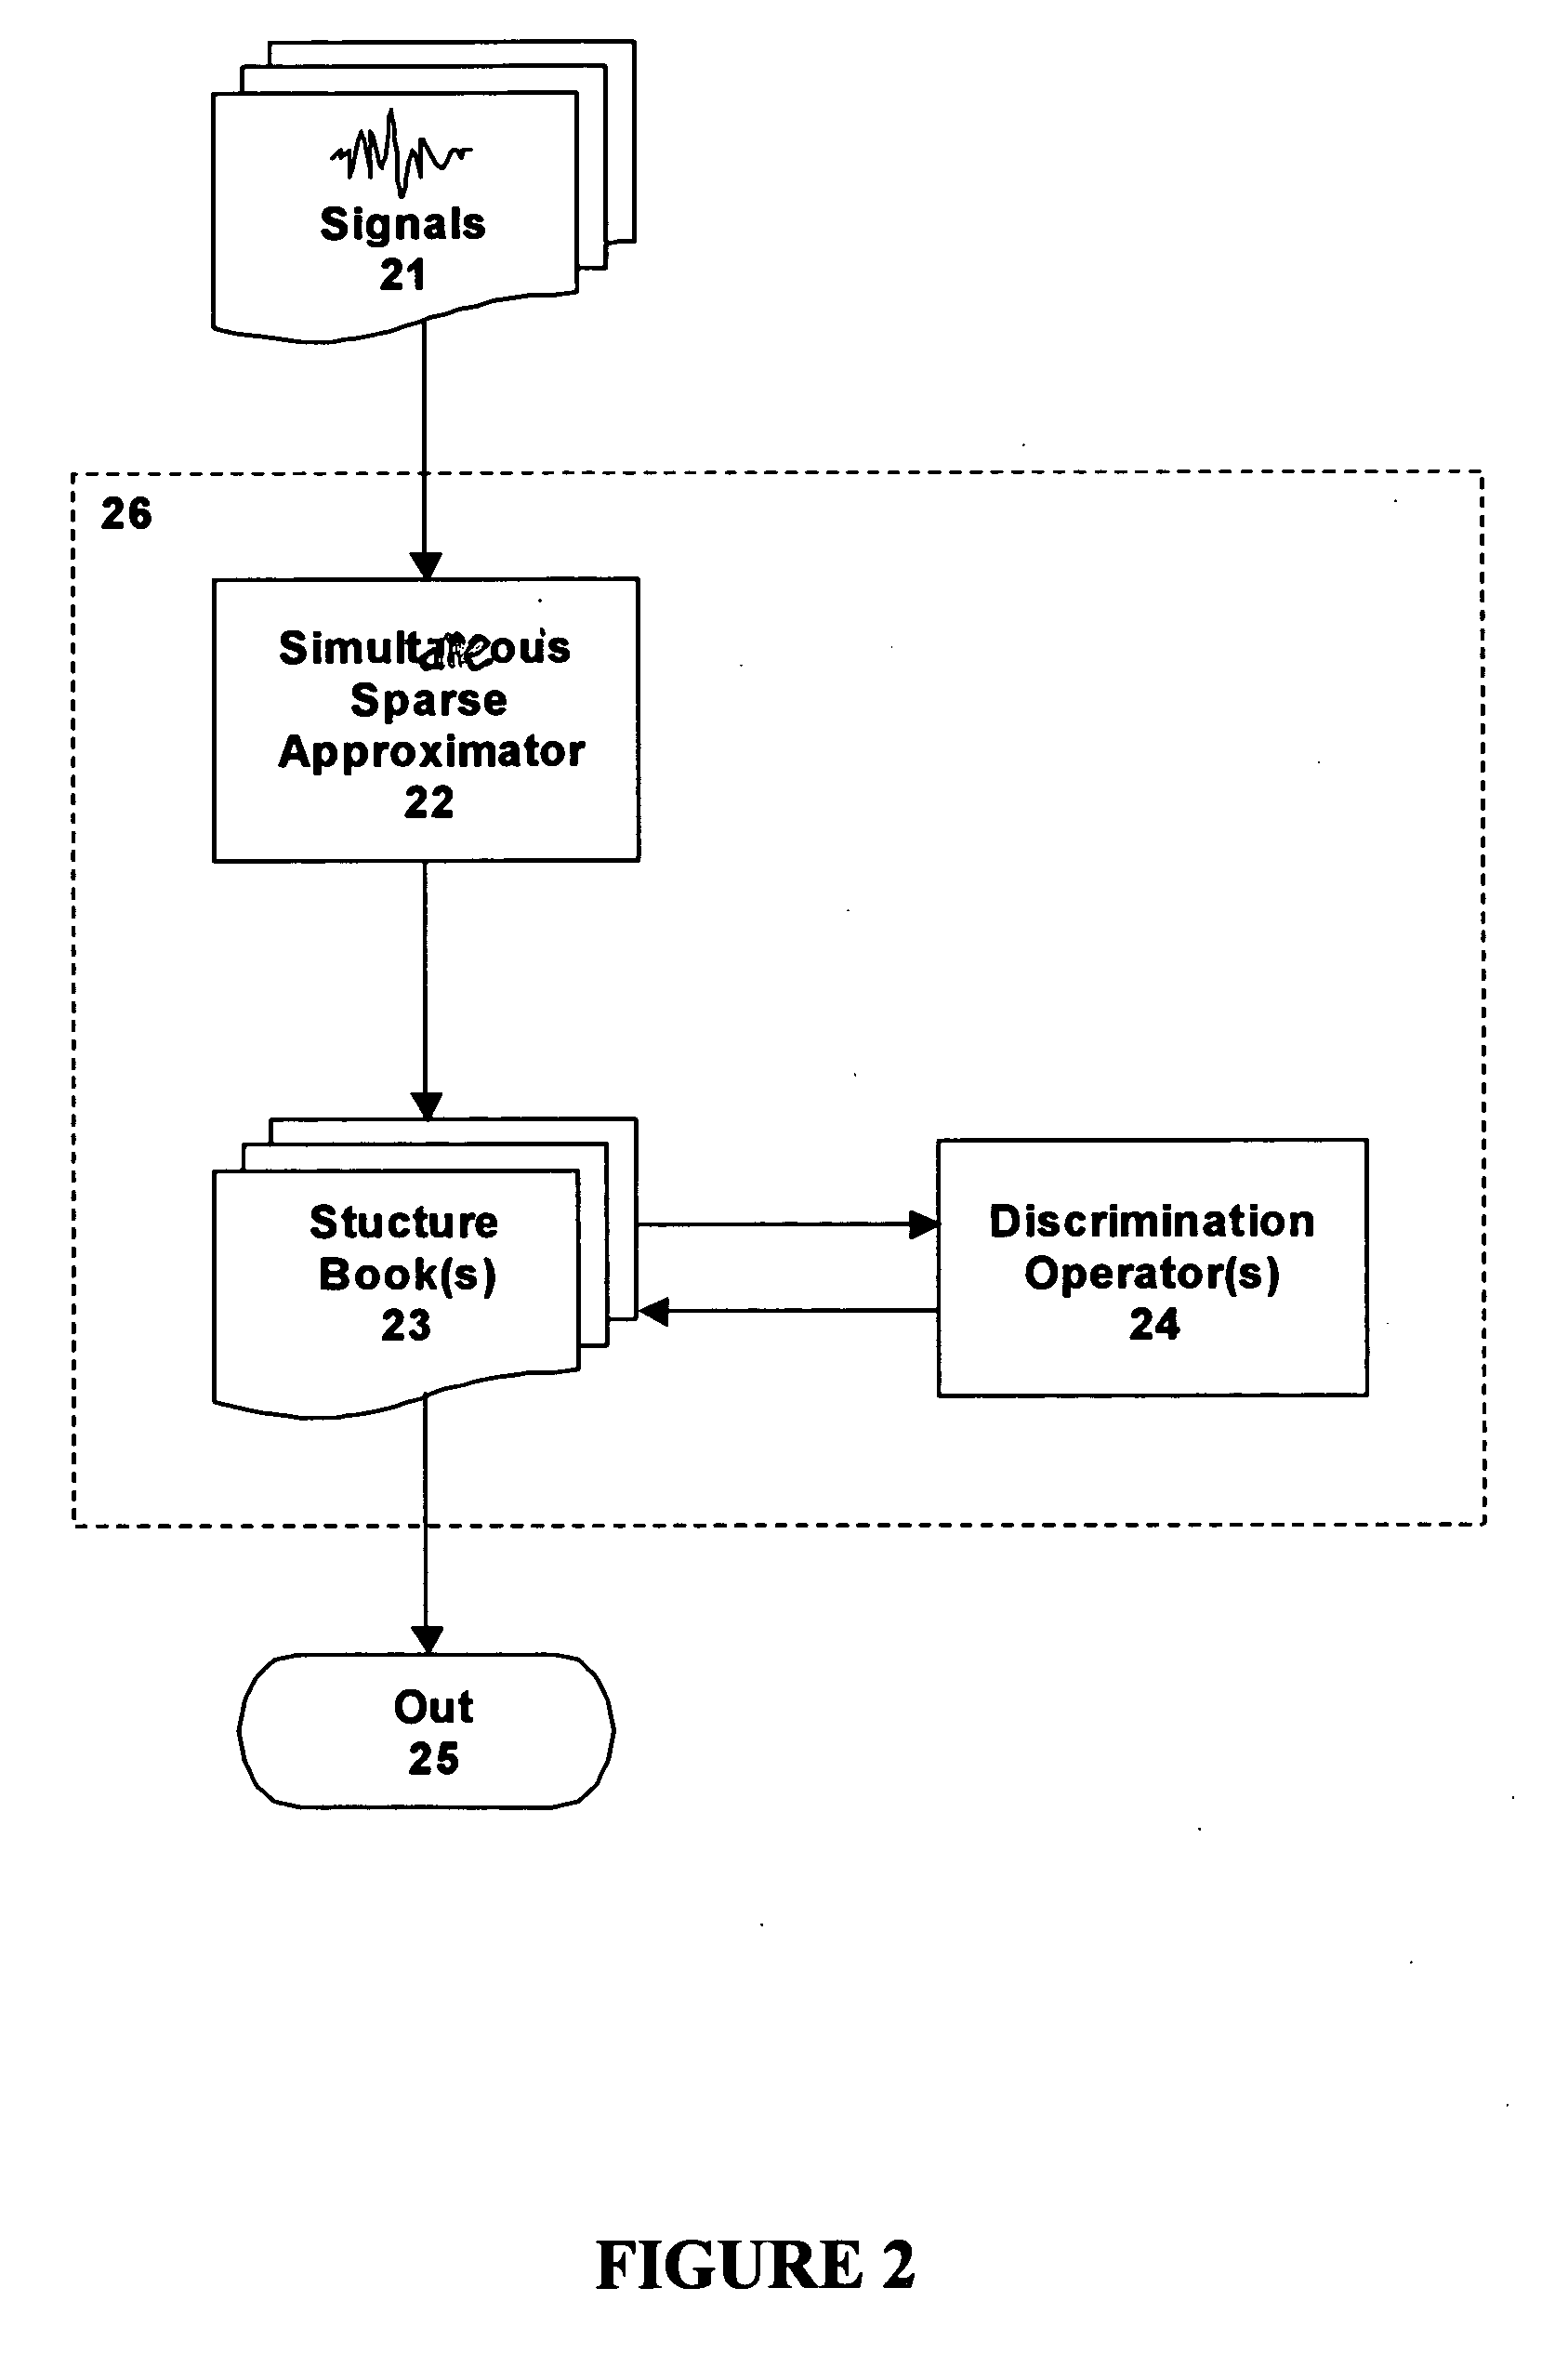 System and method for acoustic signature extraction, detection, discrimination, and localization